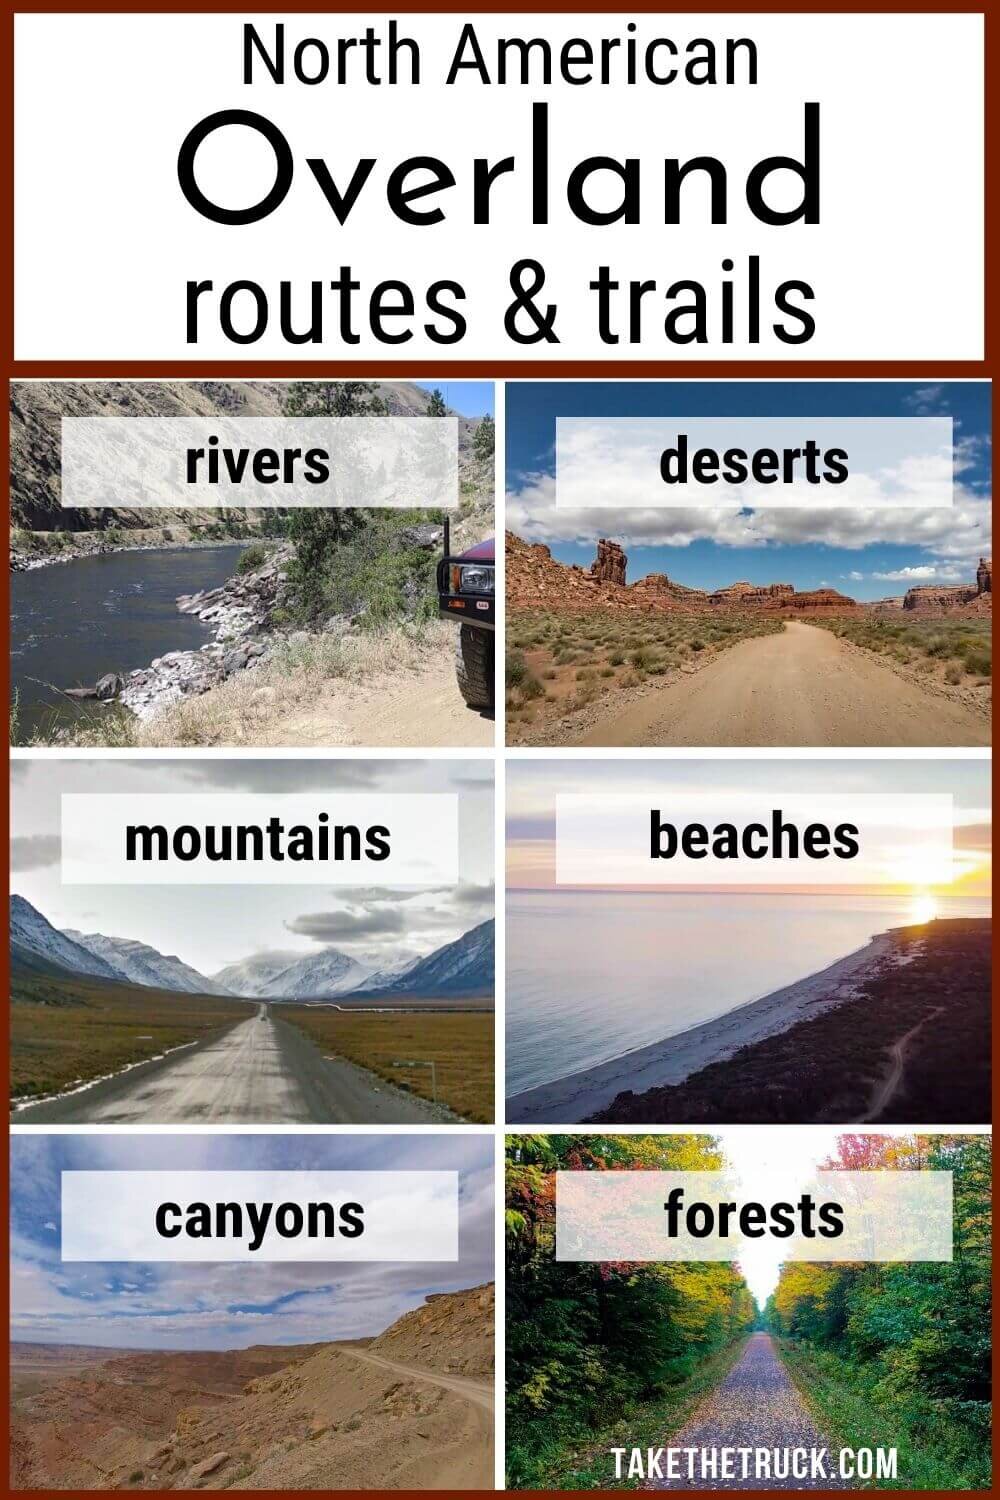 Overlanding routes and off road trails to improve your 4x4 &amp; overland travel skills! From overlanding road trips to difficult overlanding routes &amp; off road trails, there’s something for all!